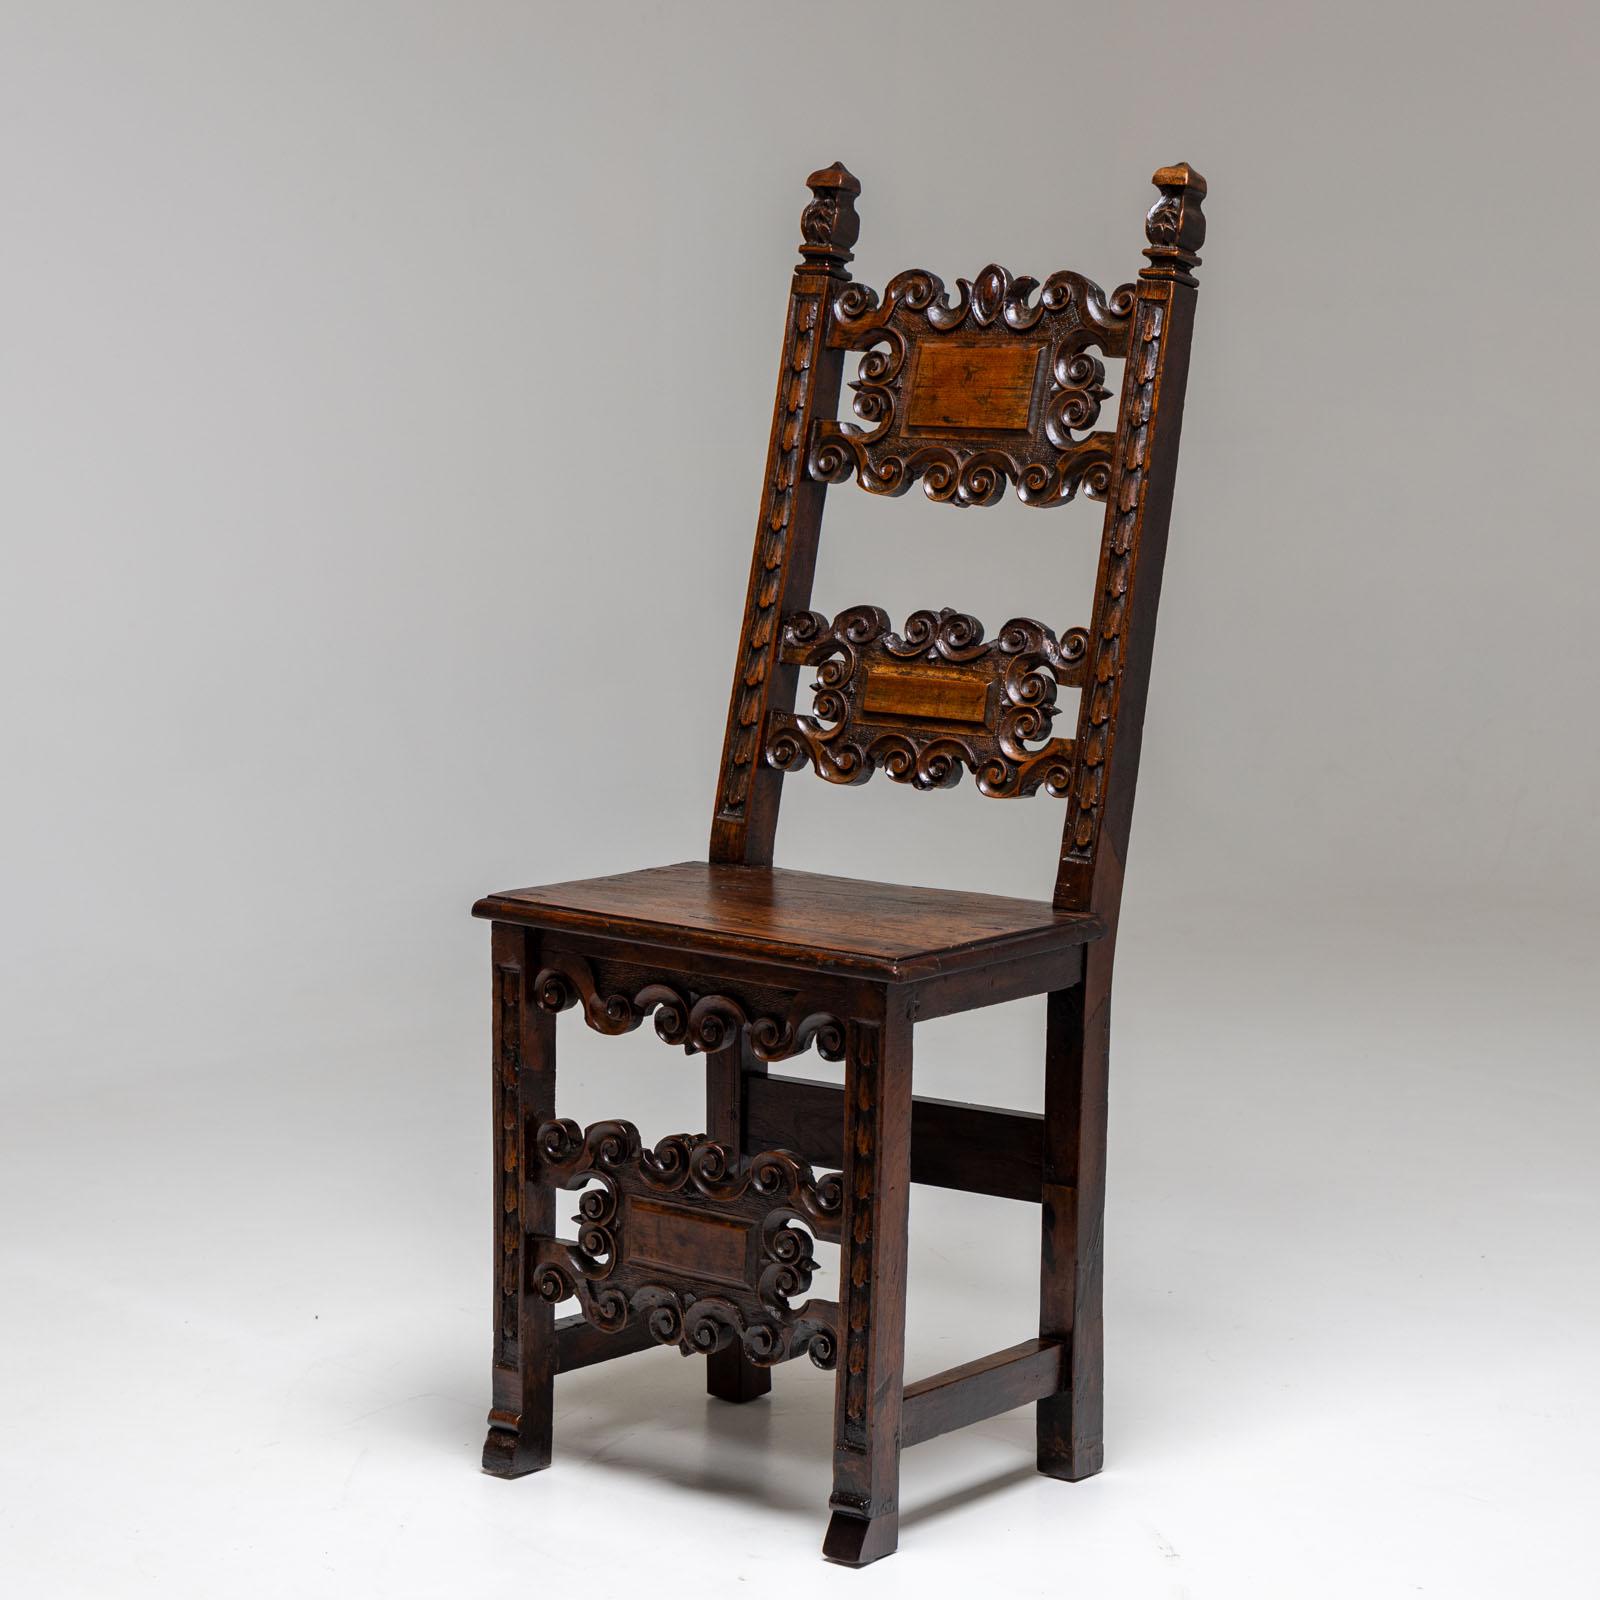 Side chair made of solid walnut with carved pinnacles and volute-decorated intermediate struts on the backrest and front legs. Beautiful authentic patina.